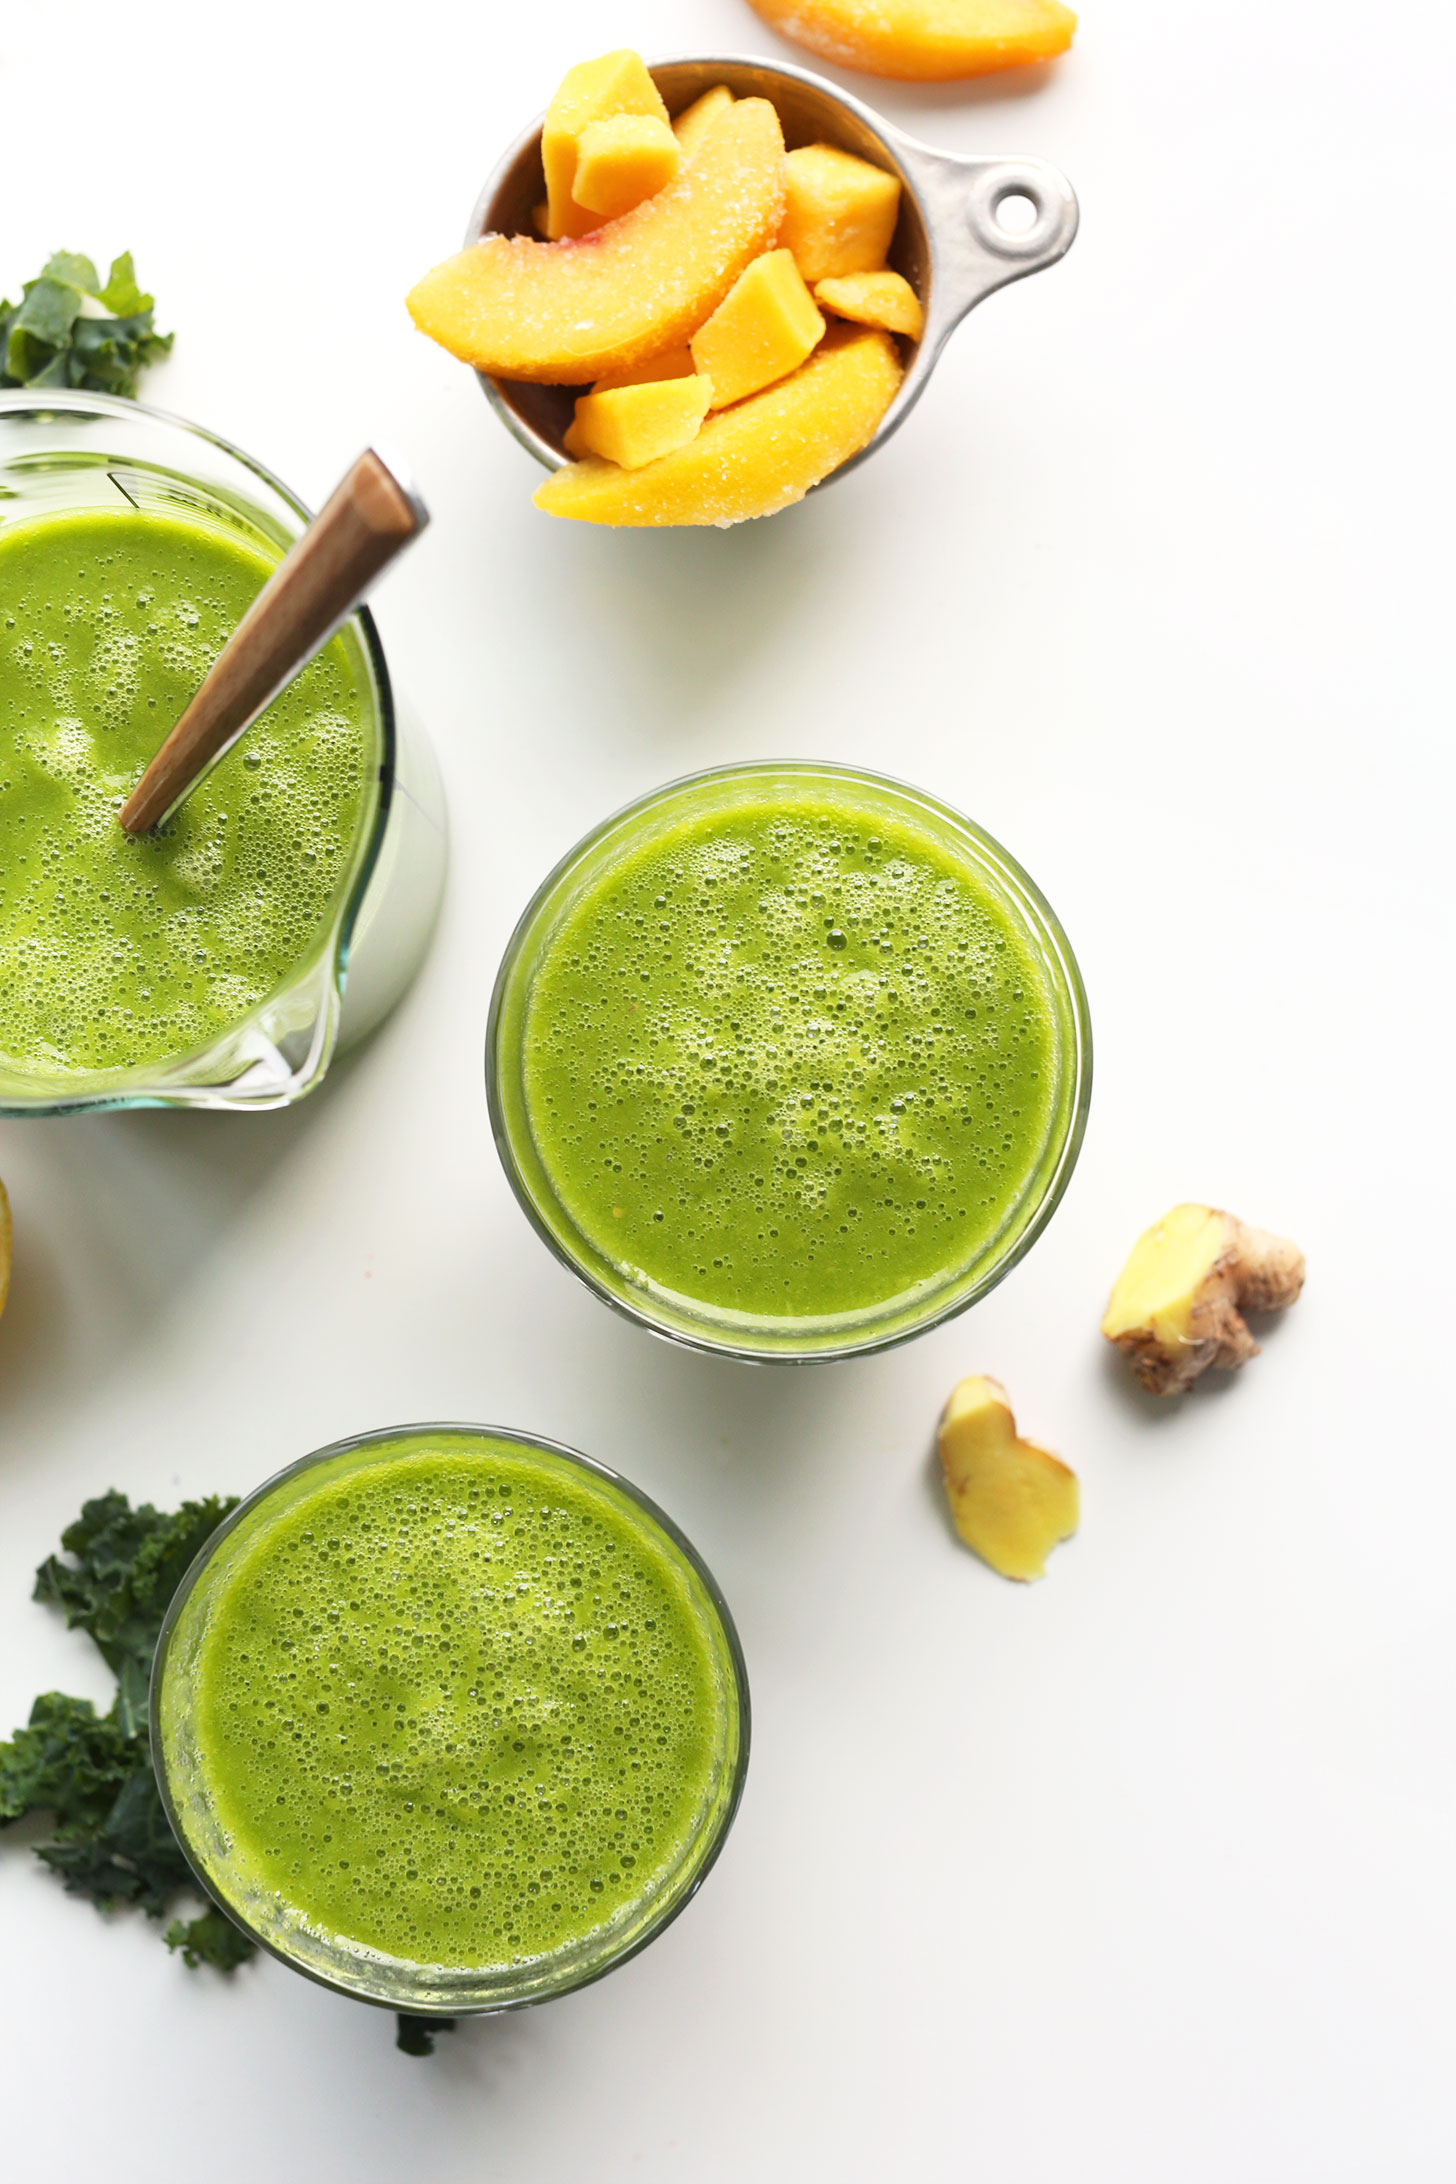 Glasses of our delicious vegan green smoothie made with ginger, lemon, peach, mango, and kale